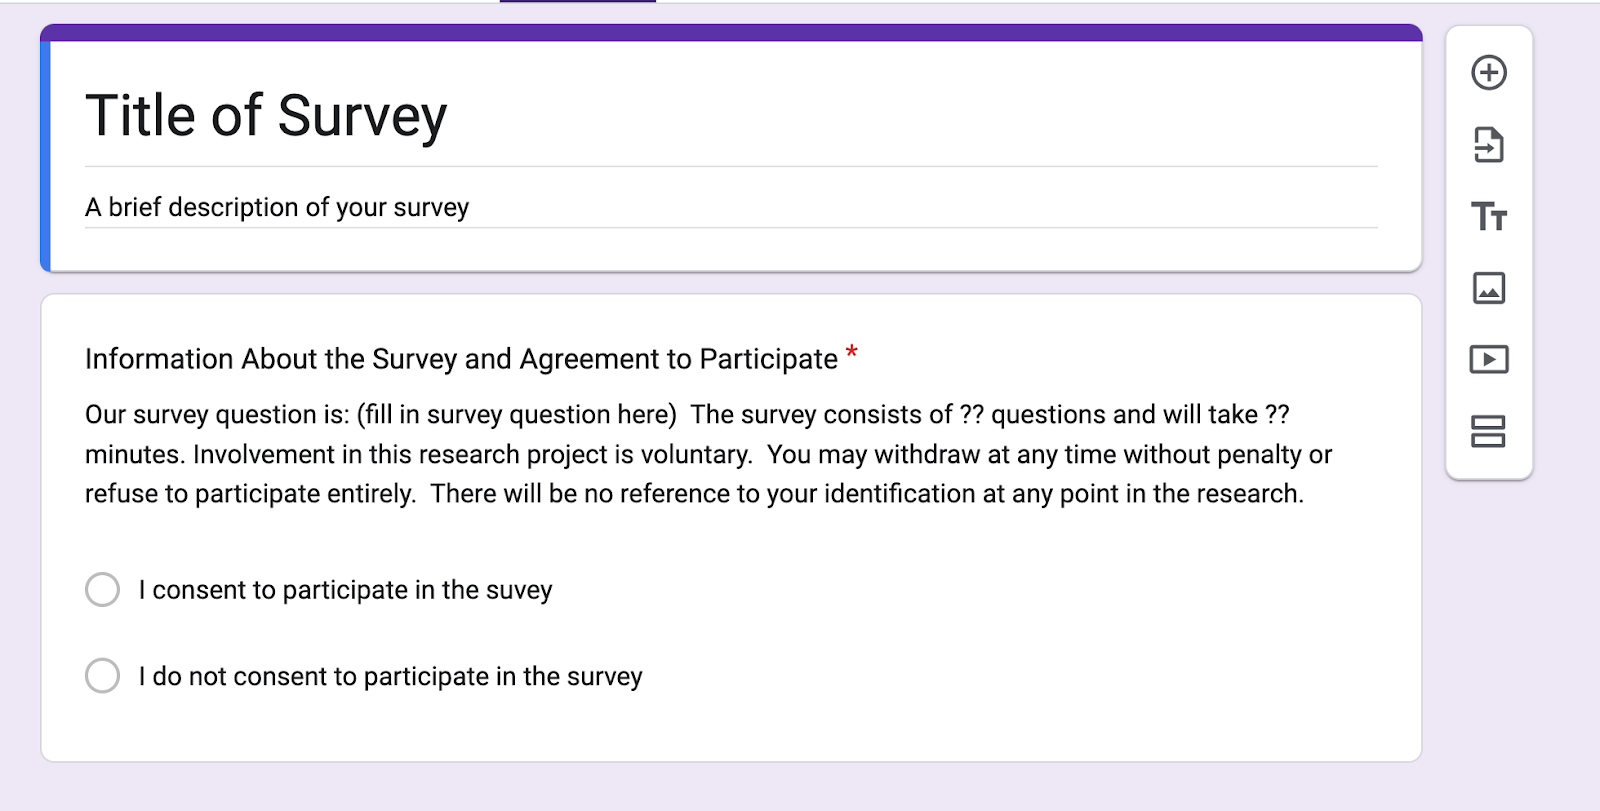 Example of a google forms survey. Title of survey, a brief description of your survey, and information about the survey and agreement to participate.